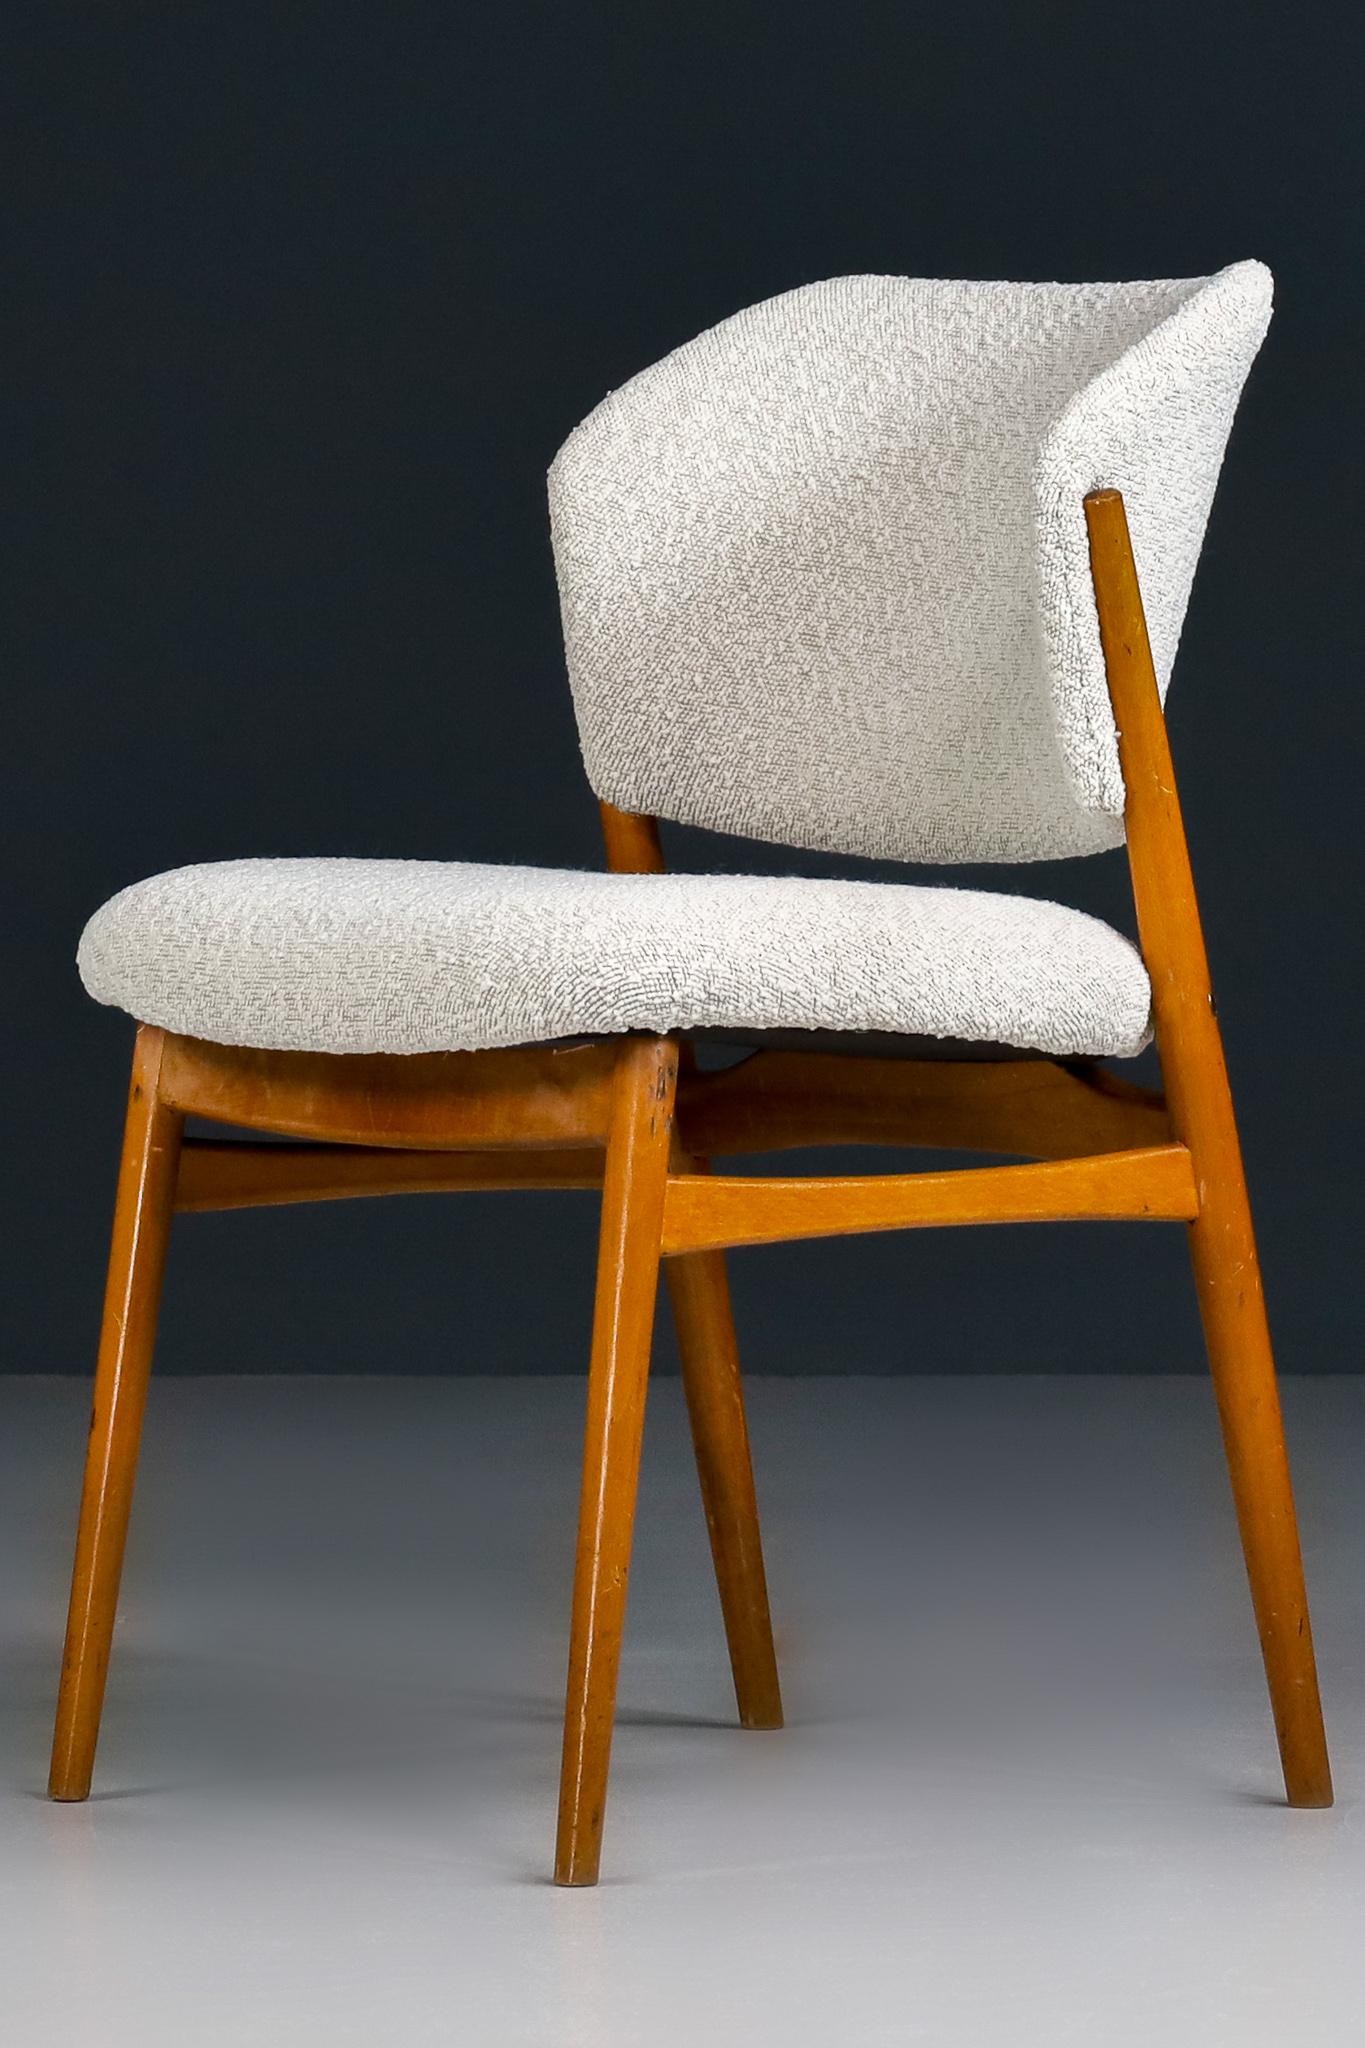 Mid-Century Modern Dining Chairs in New Bouclé Fabric by Spahn, Germany 1950s For Sale 4